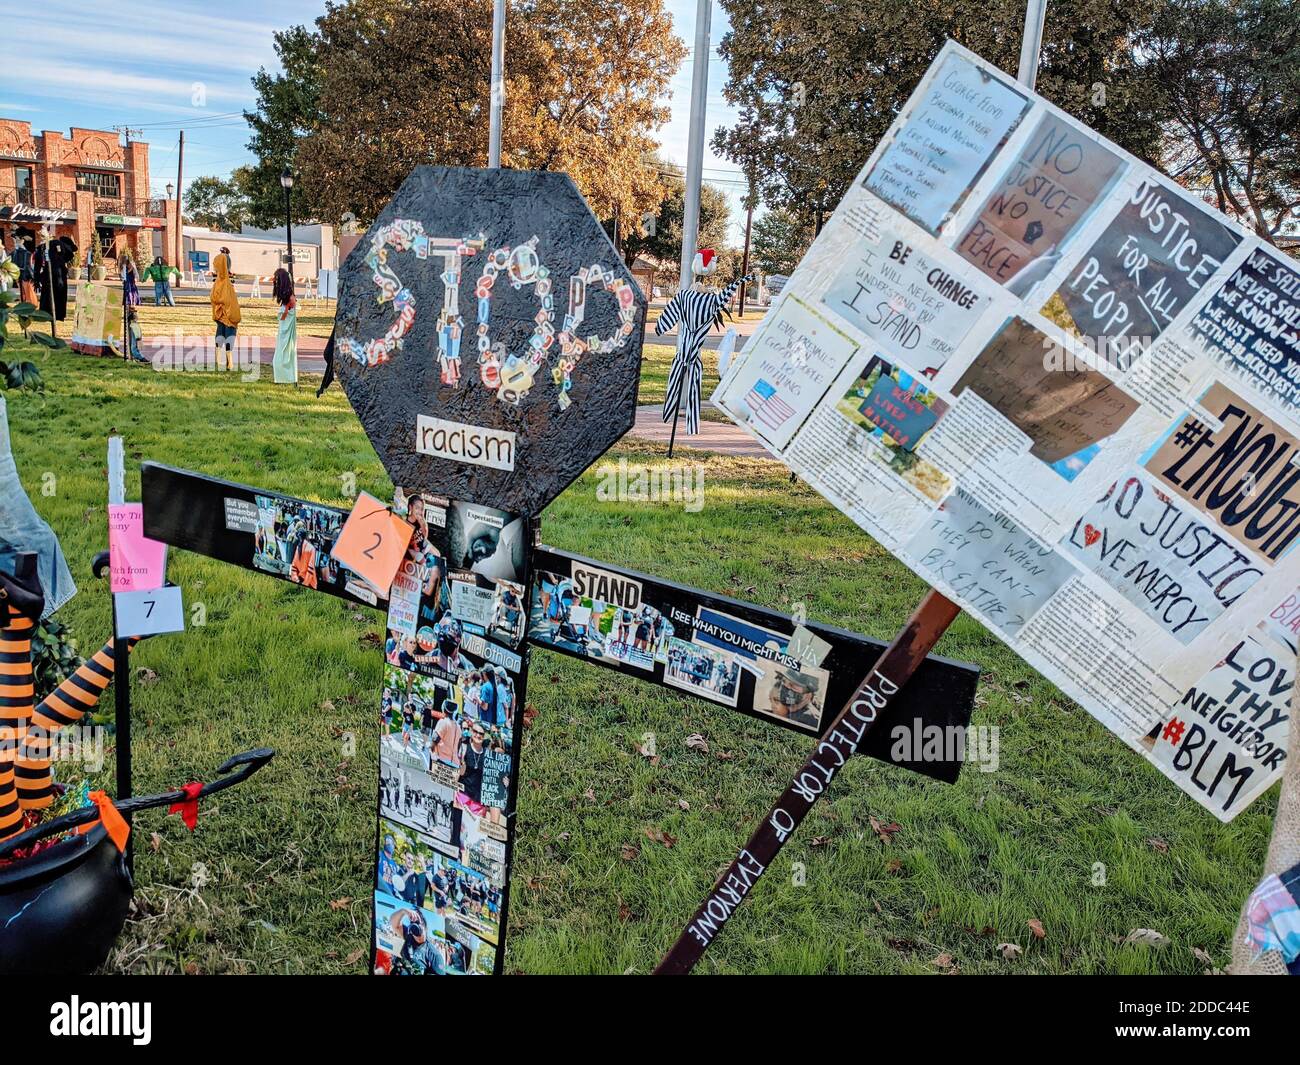 Fall scarecrow contest in Midlothian, Texas, had resident enter 'Stop Racism' scarecrow using clippings and photos of current events in USA. Stock Photo